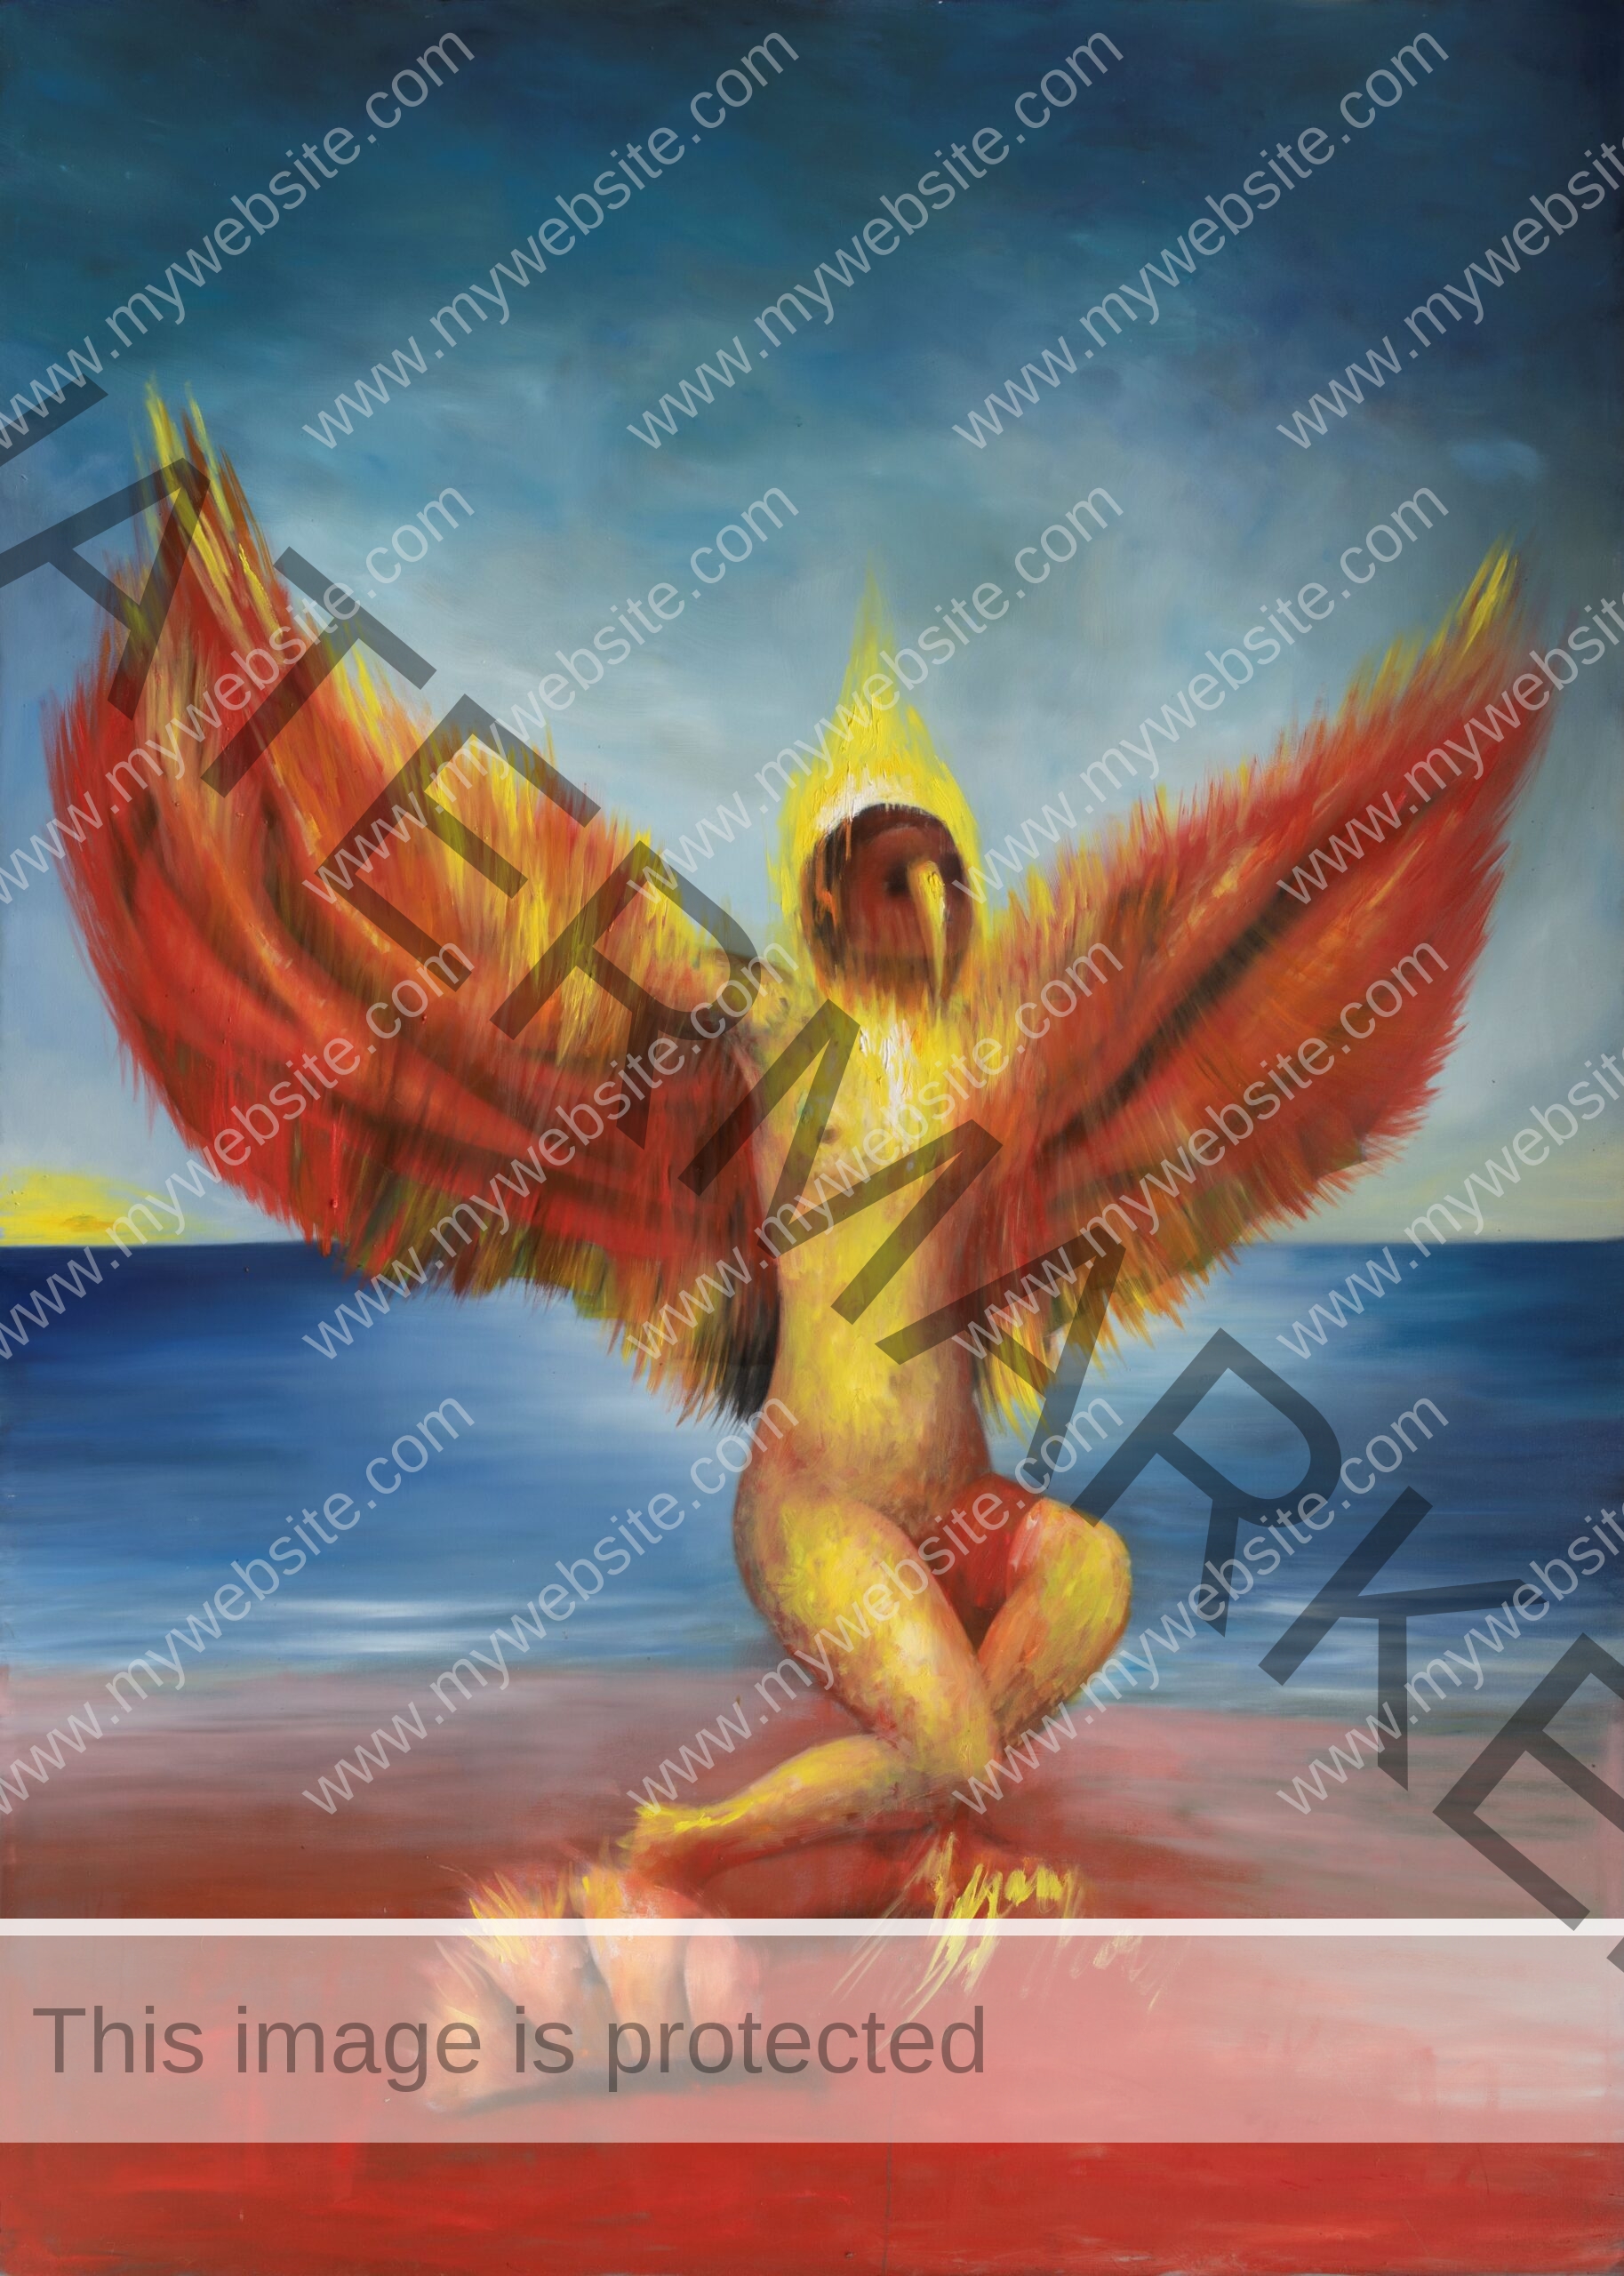 Ave de Fuego painting by Pablo Mejias, featuring a half-man, half-bird set ablaze on a beach. The ocean extends into the background.